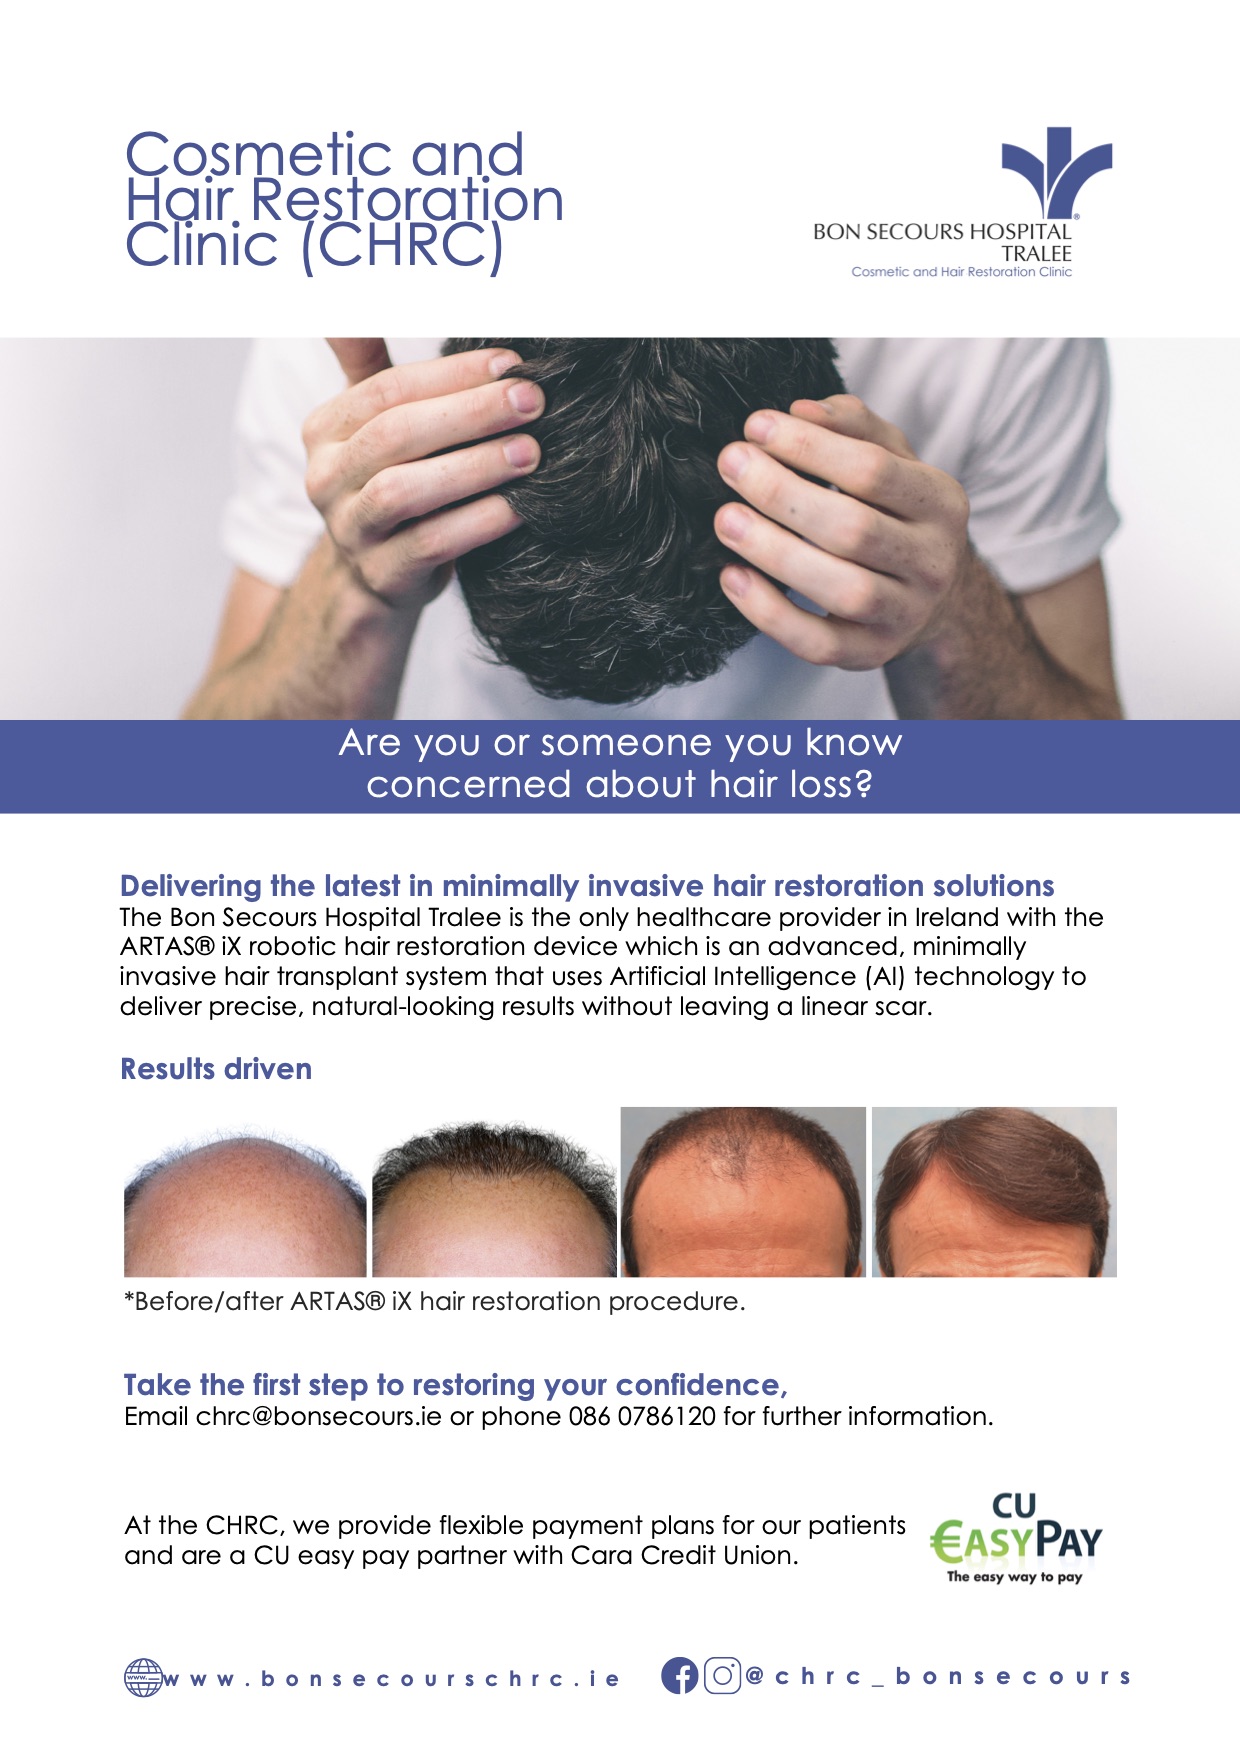 Sponsored: Treatments For Acne At The Cosmetic And Hair Restoration Clinic